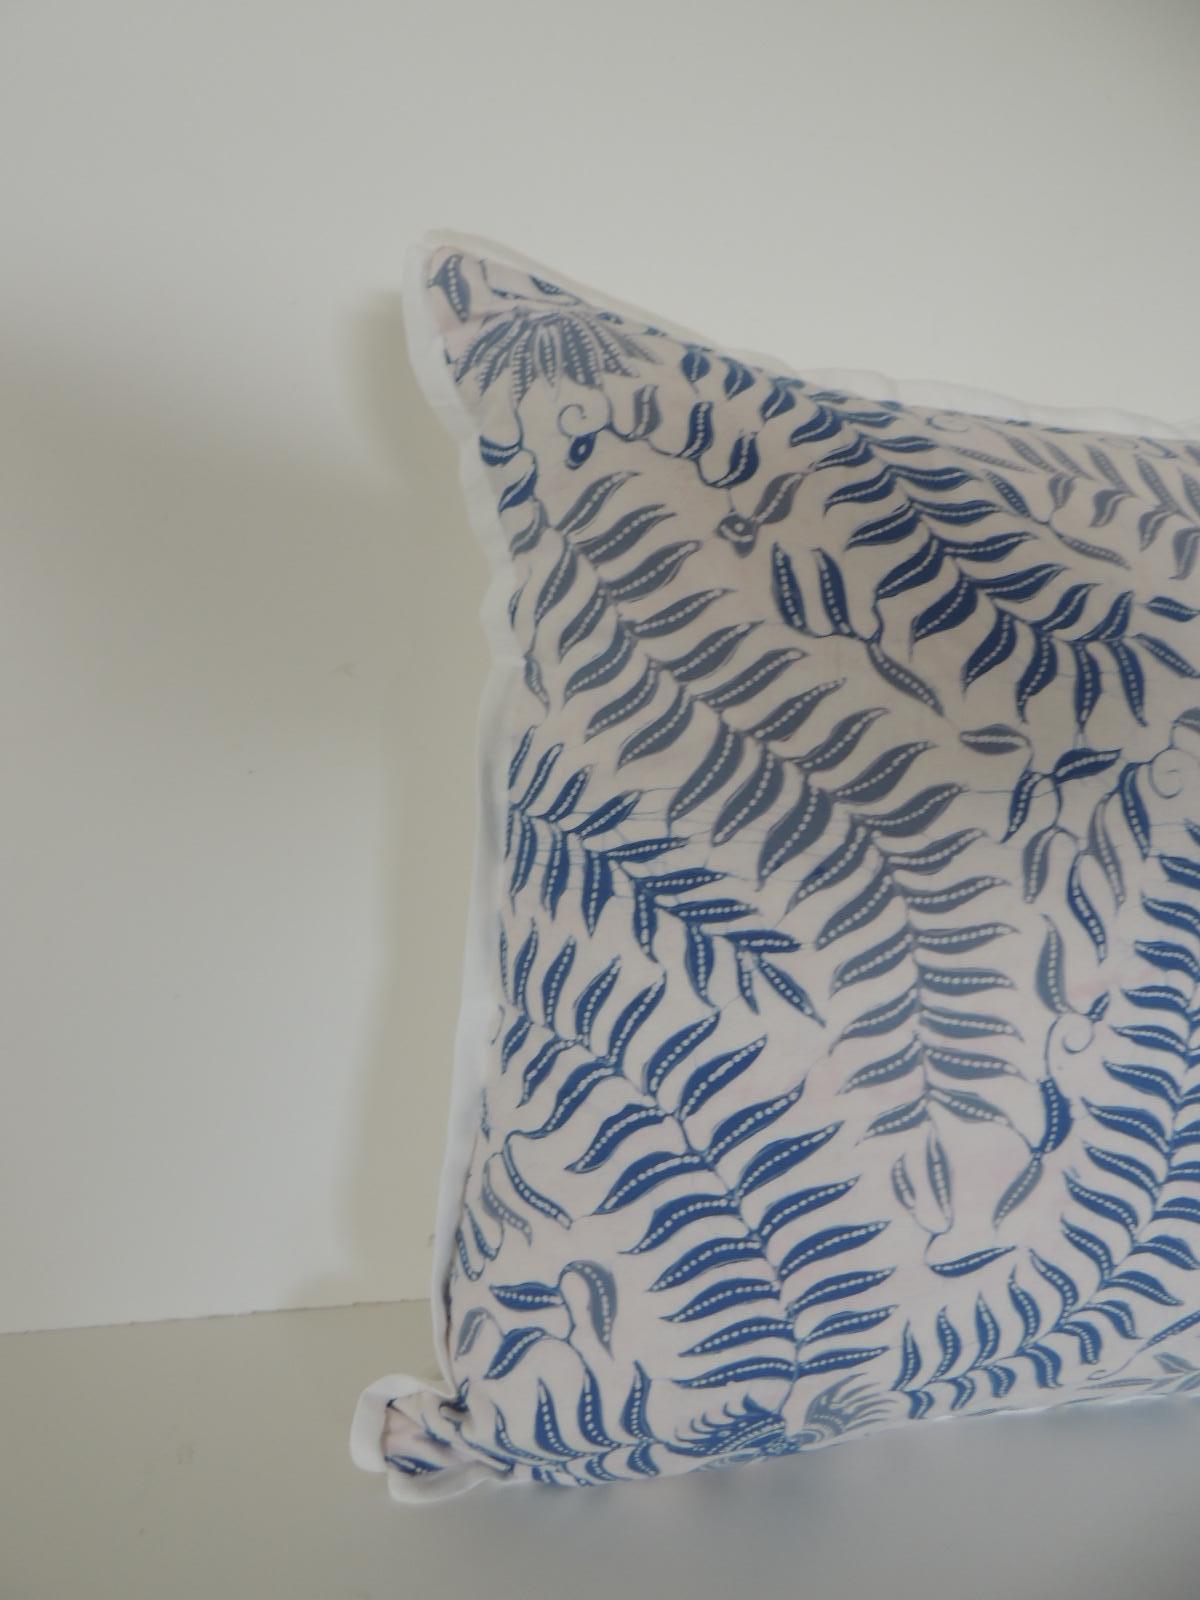 Petite square floral blue and white throw pillow depicting birds and fern in the front textile. Throw pillow in light and dark shades of blue. Pillow embellished with ATG custom white cotton flat trim all around. Decorative bolster pillow finished